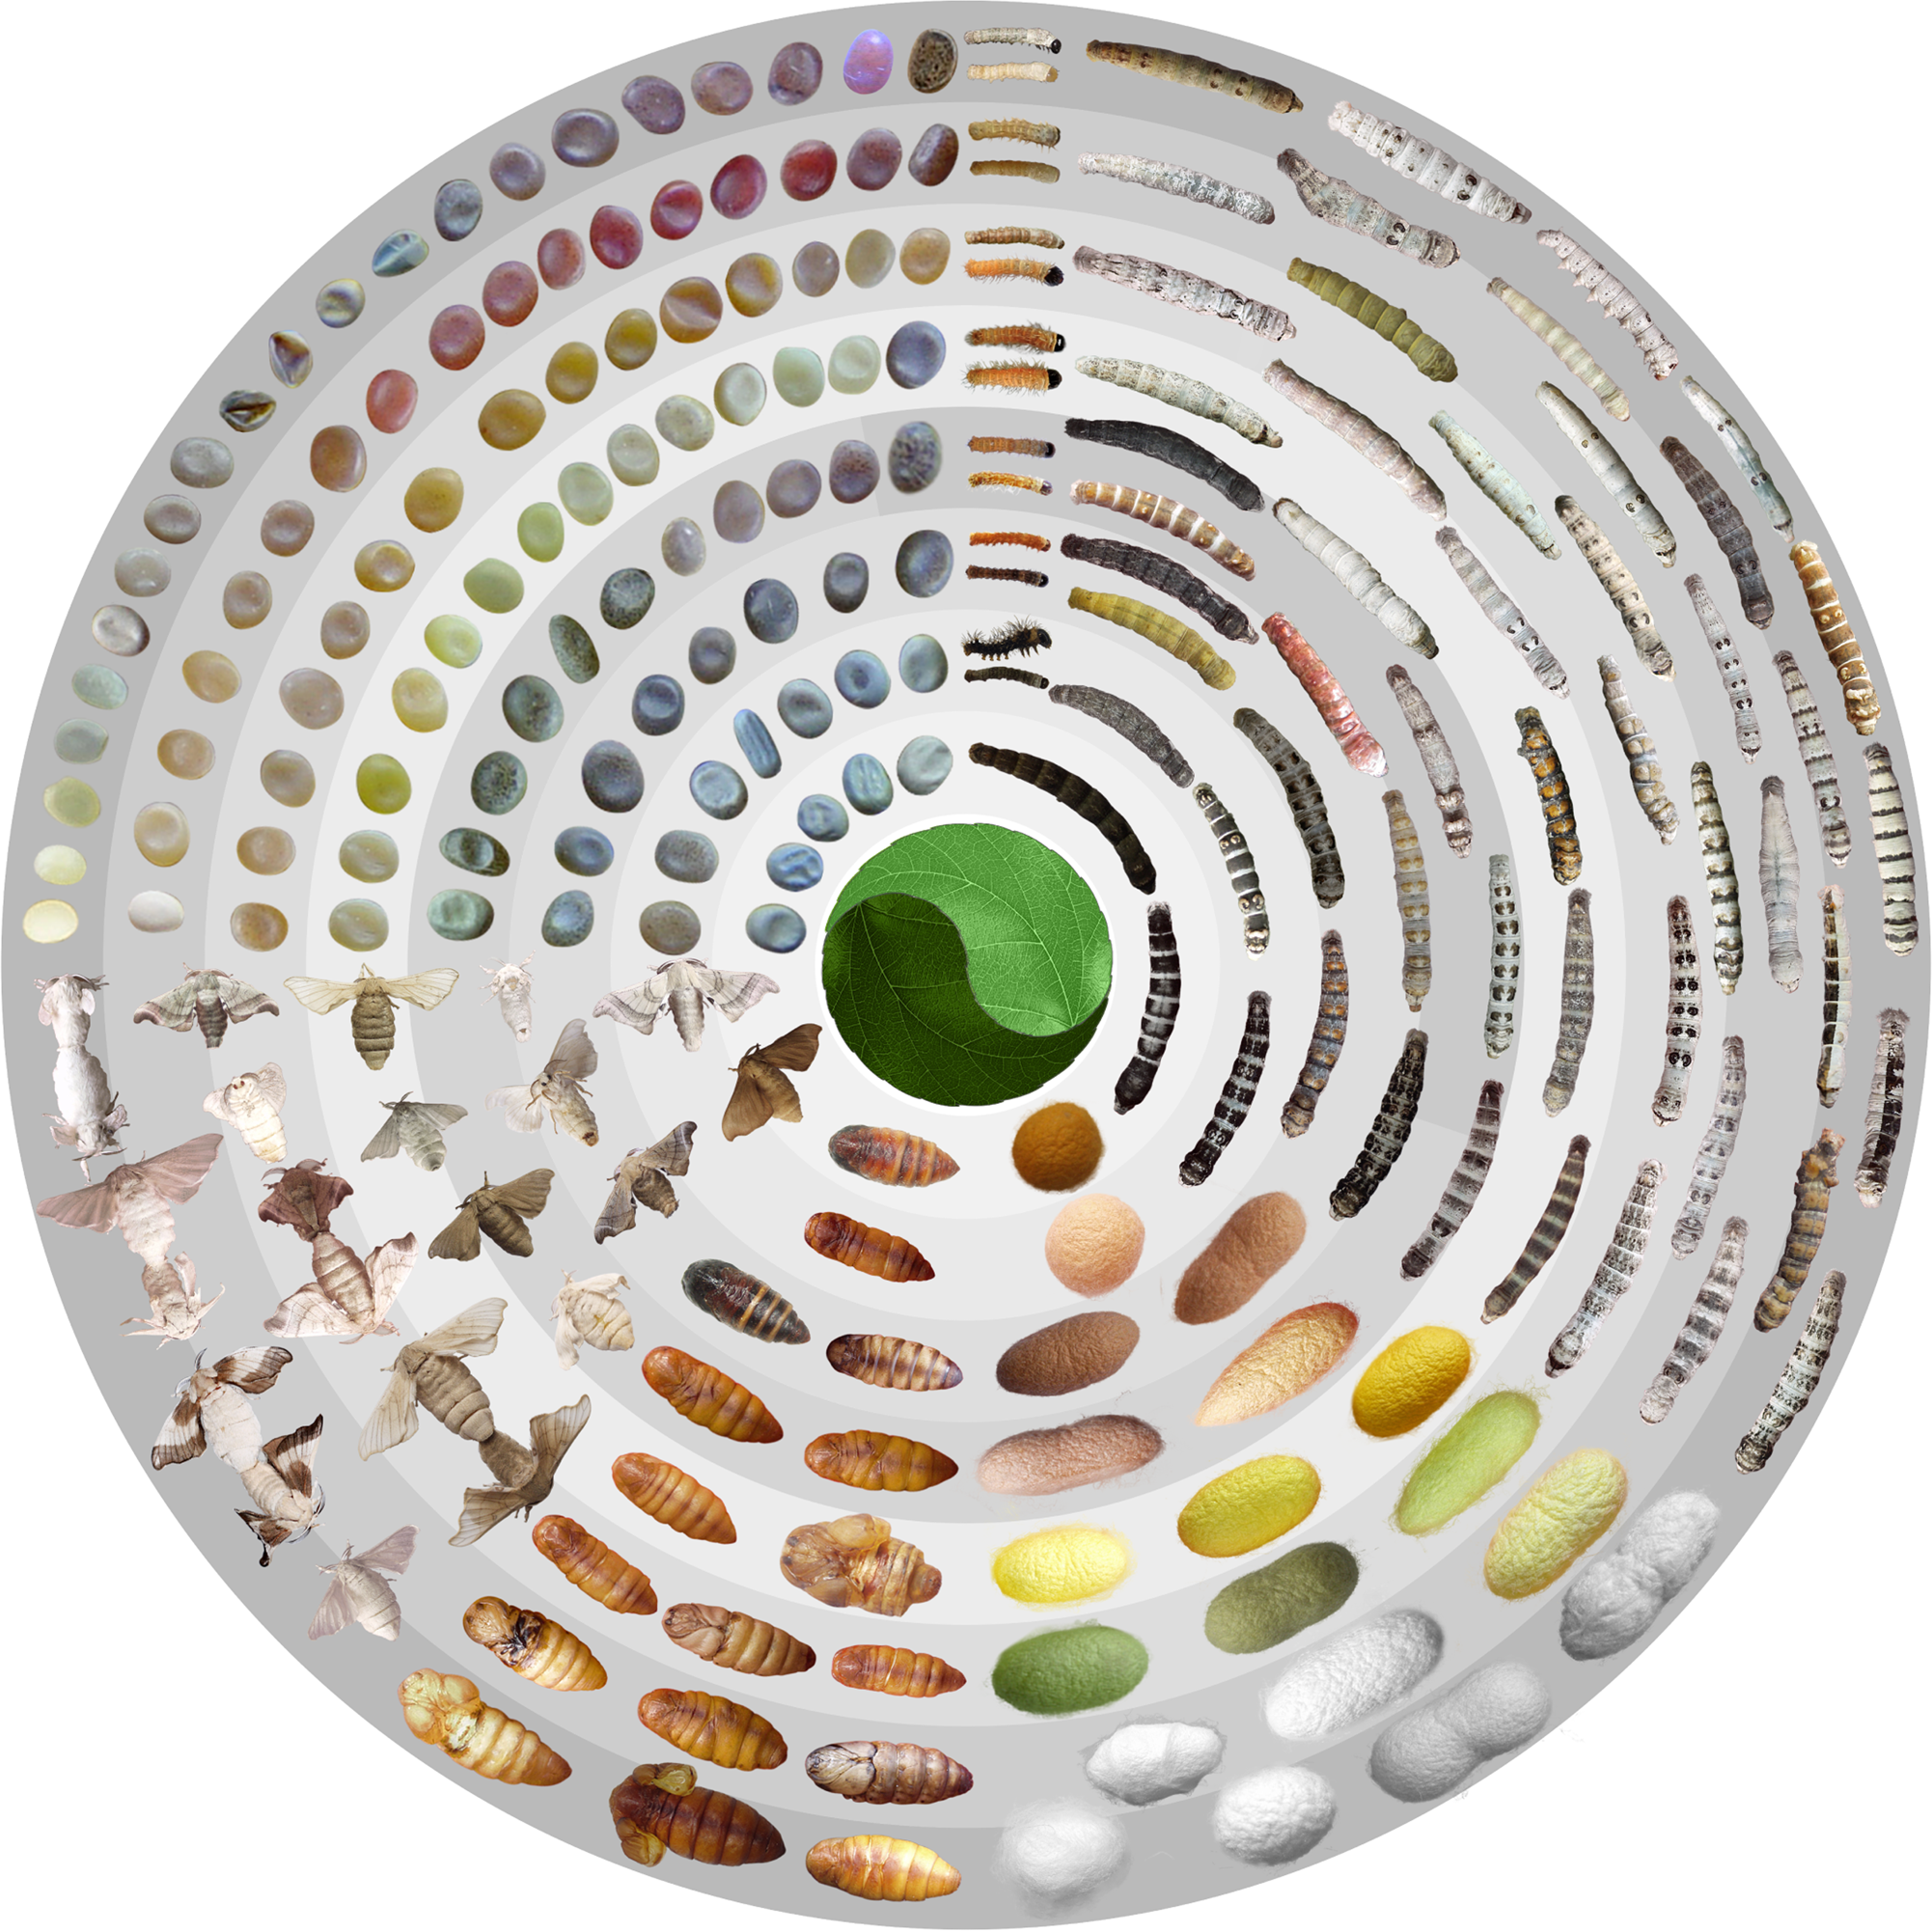 High-resolution silkworm pan-genome provides genetic insights into artificial selection and ecological adaptation Nature Communications